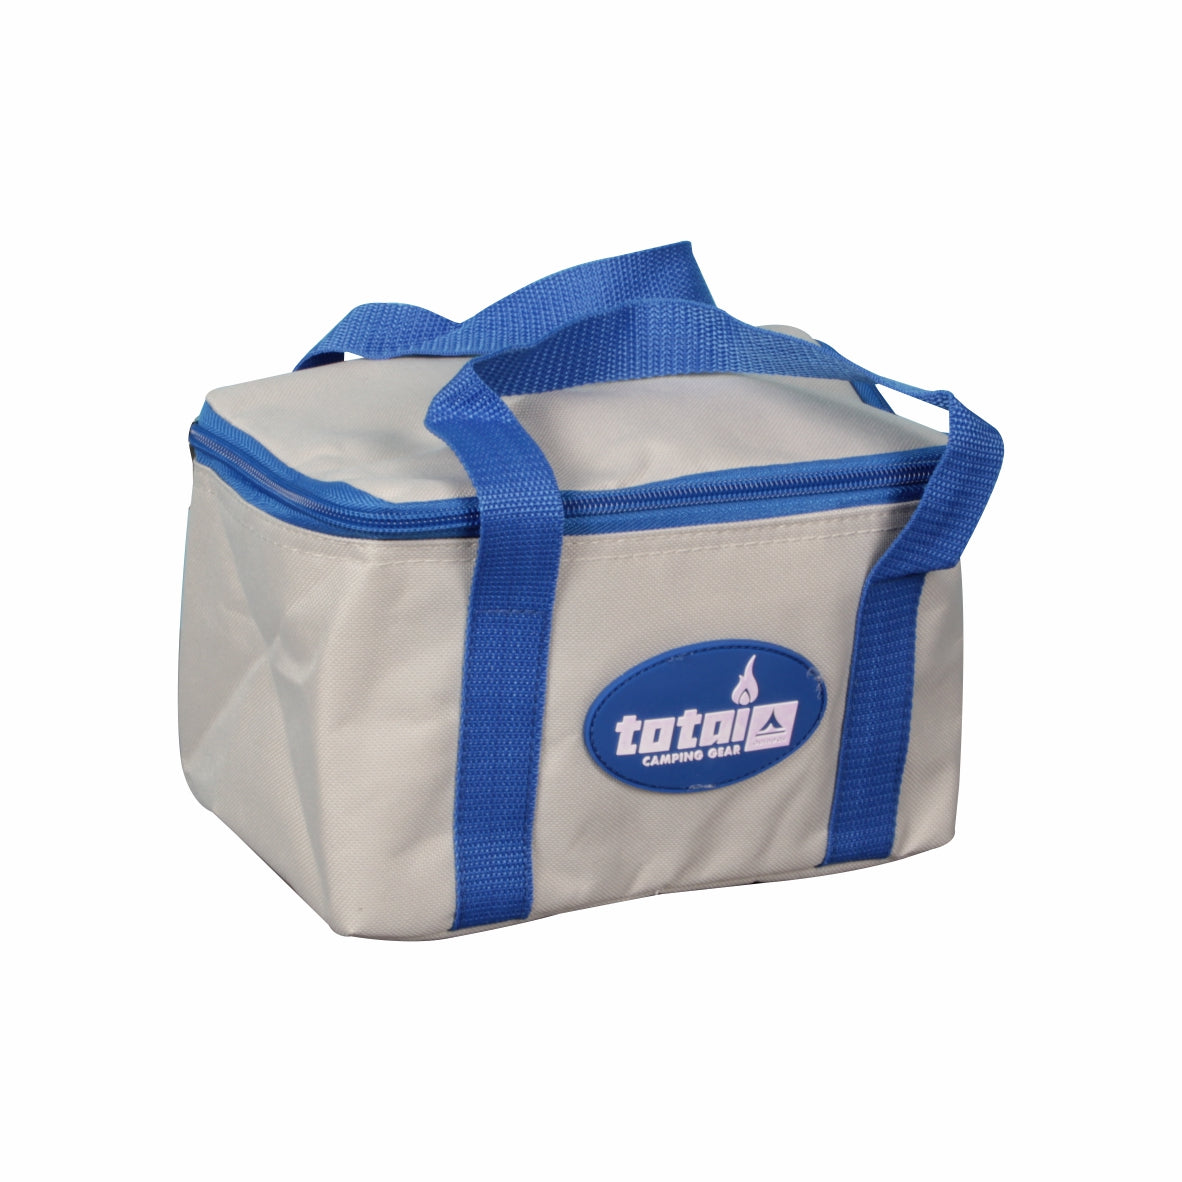 Totai Cooler Bag 6 Can Fit Lunch Bag 05/CB06